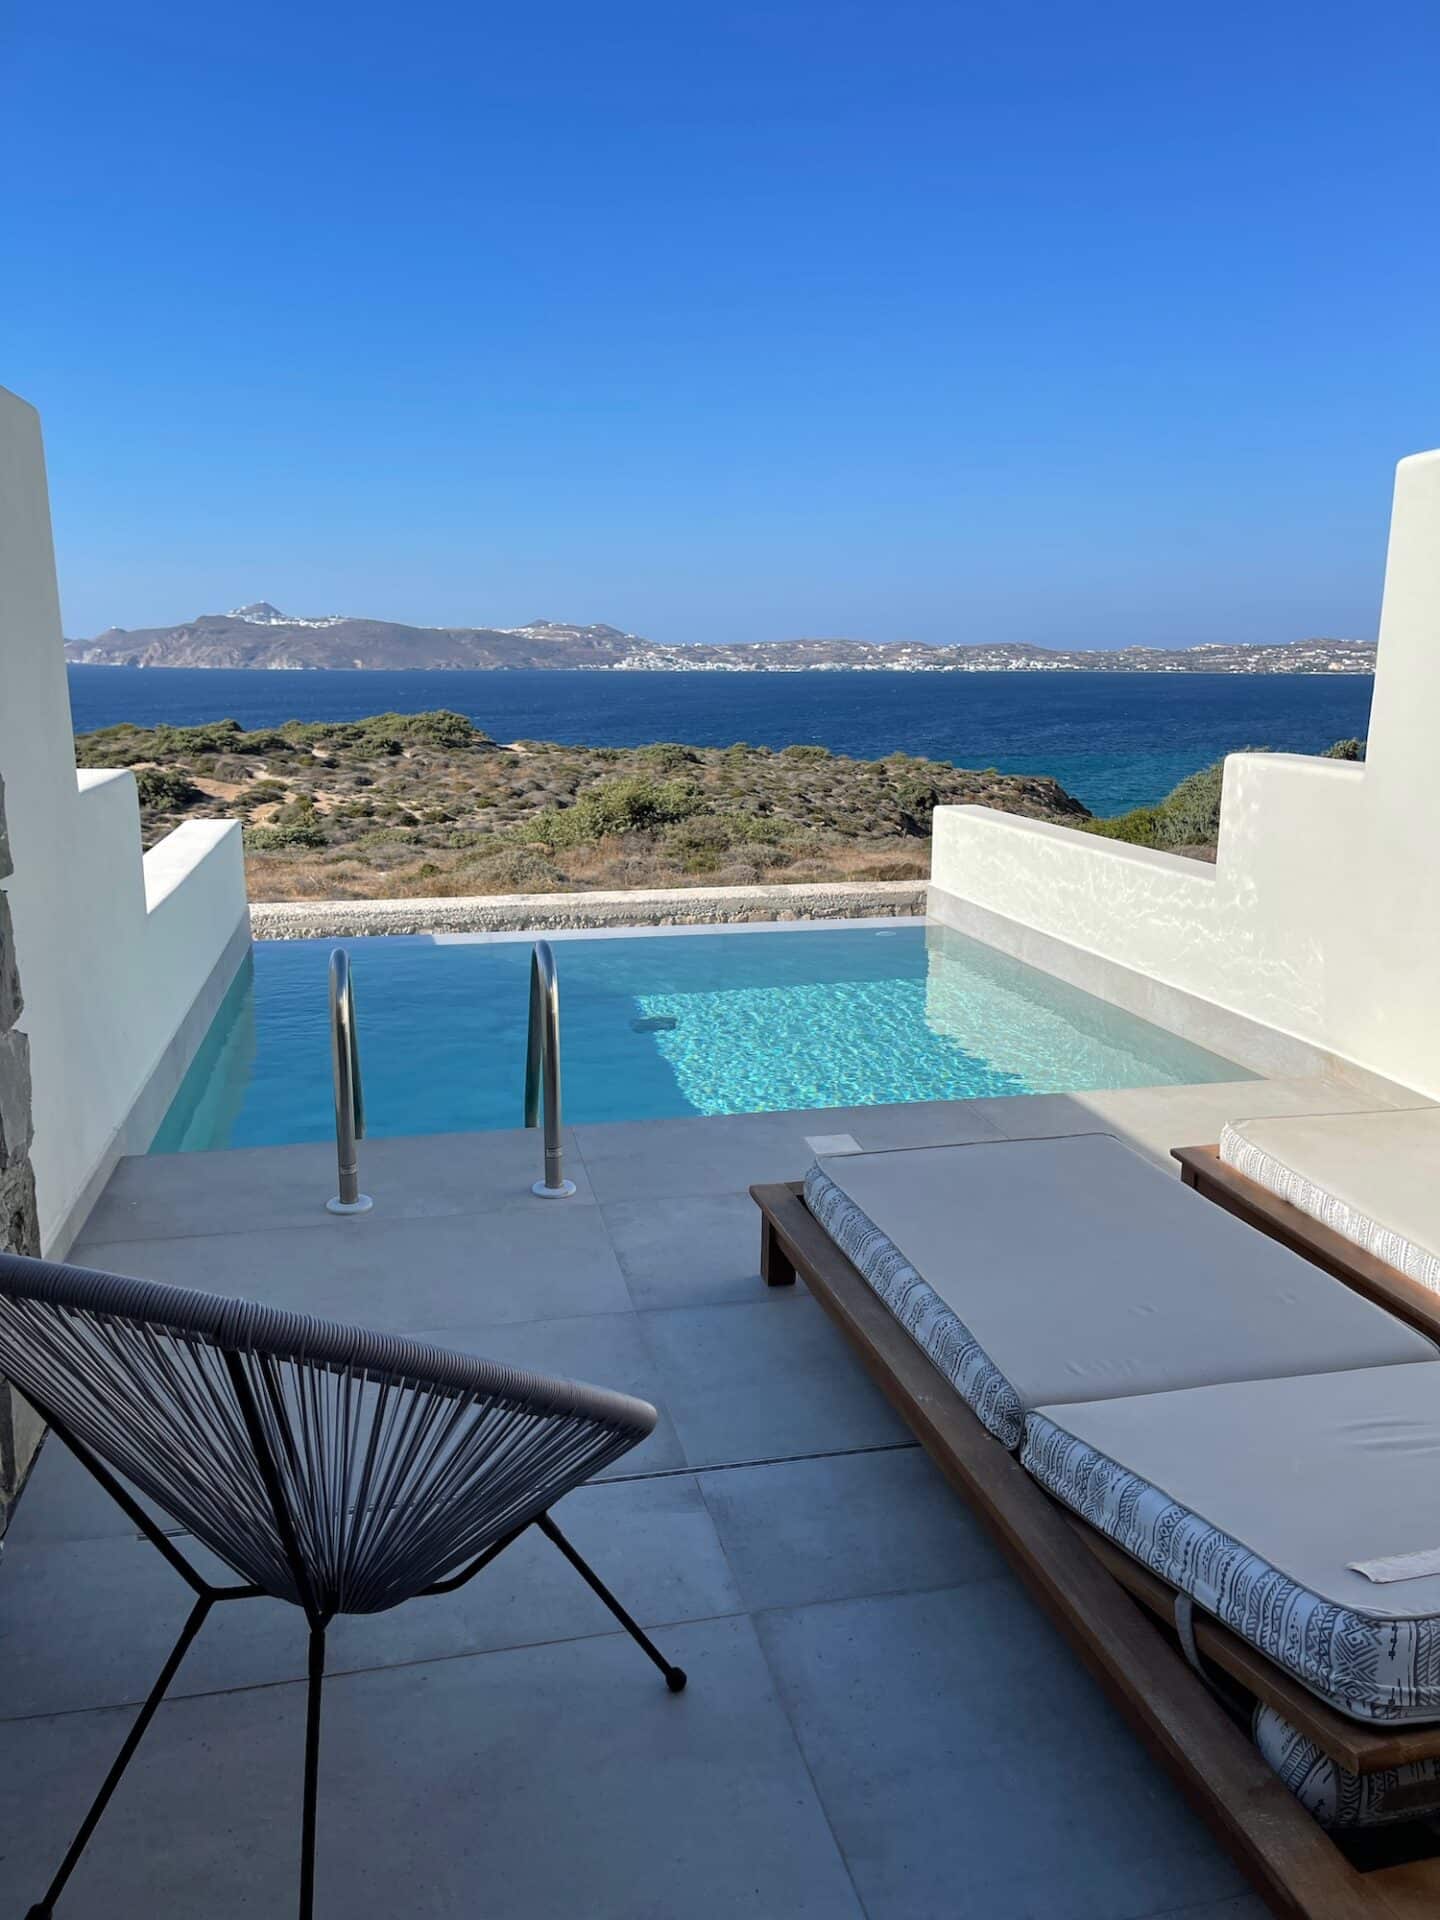 A tranquil infinity pool overlooking the azure Aegean Sea in Milos, flanked by sunbeds and a stylish black wire chair, capturing the essence of luxury Greek island living.